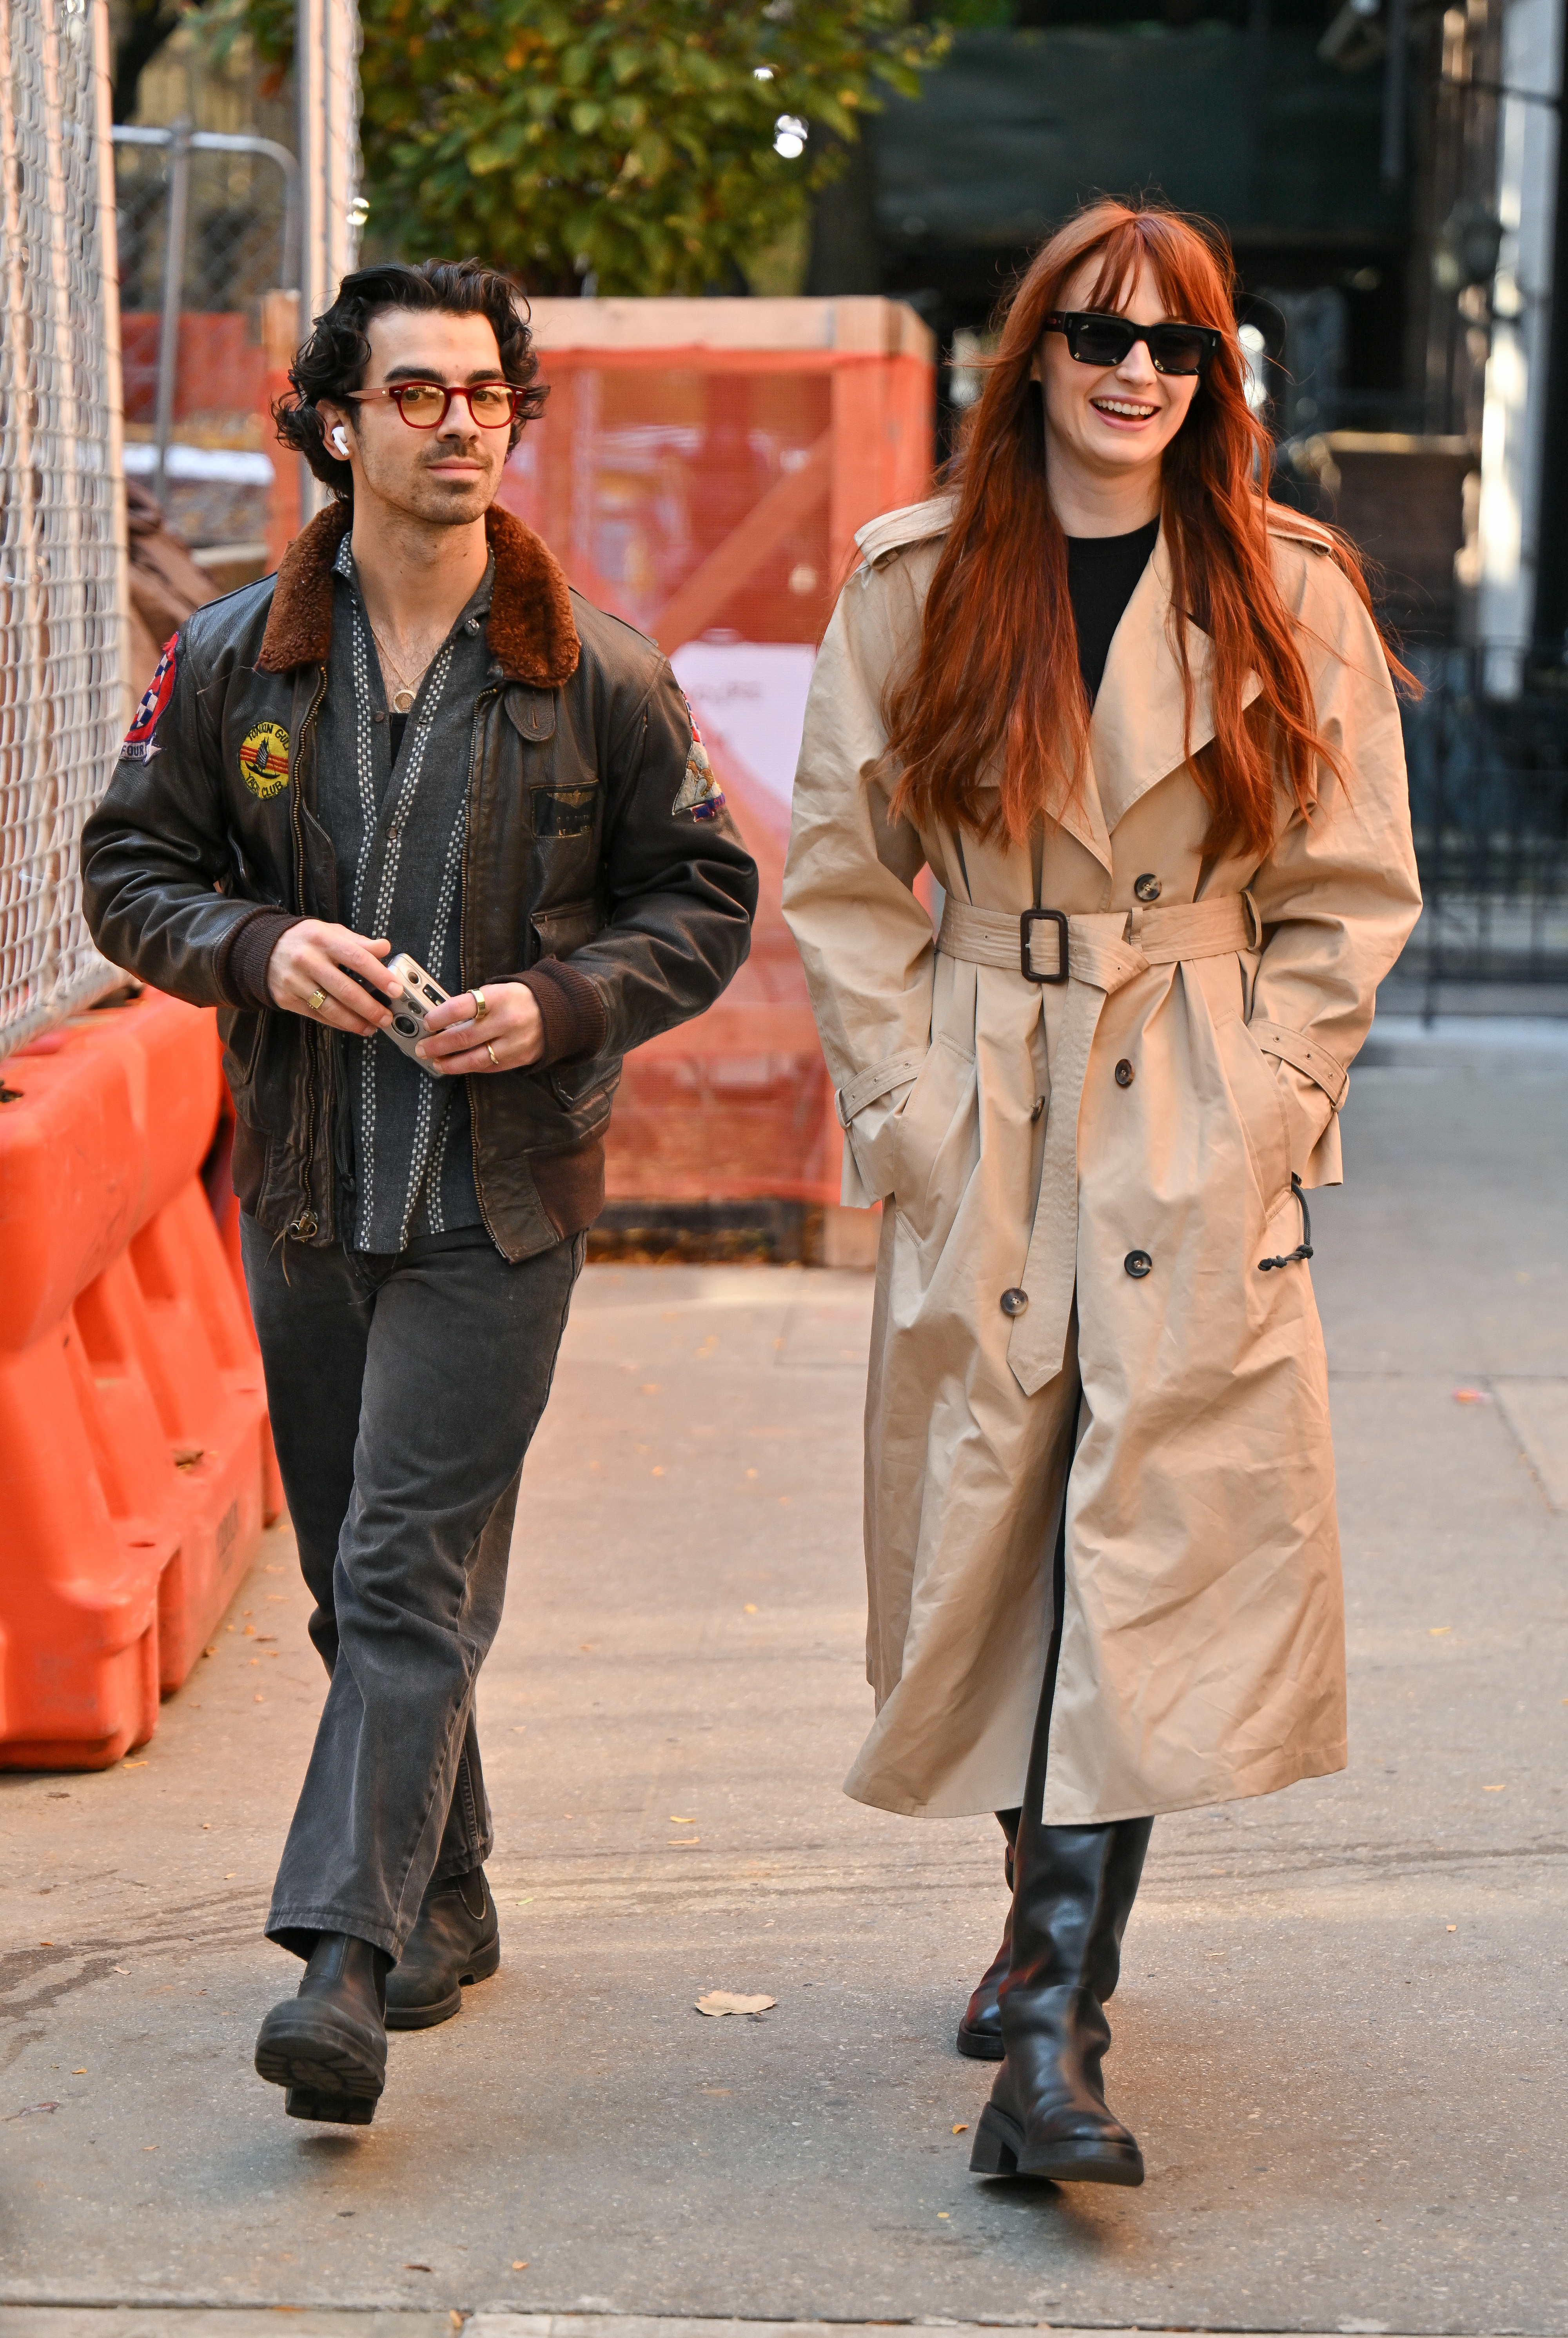 Joe and Sophie walking together on the street